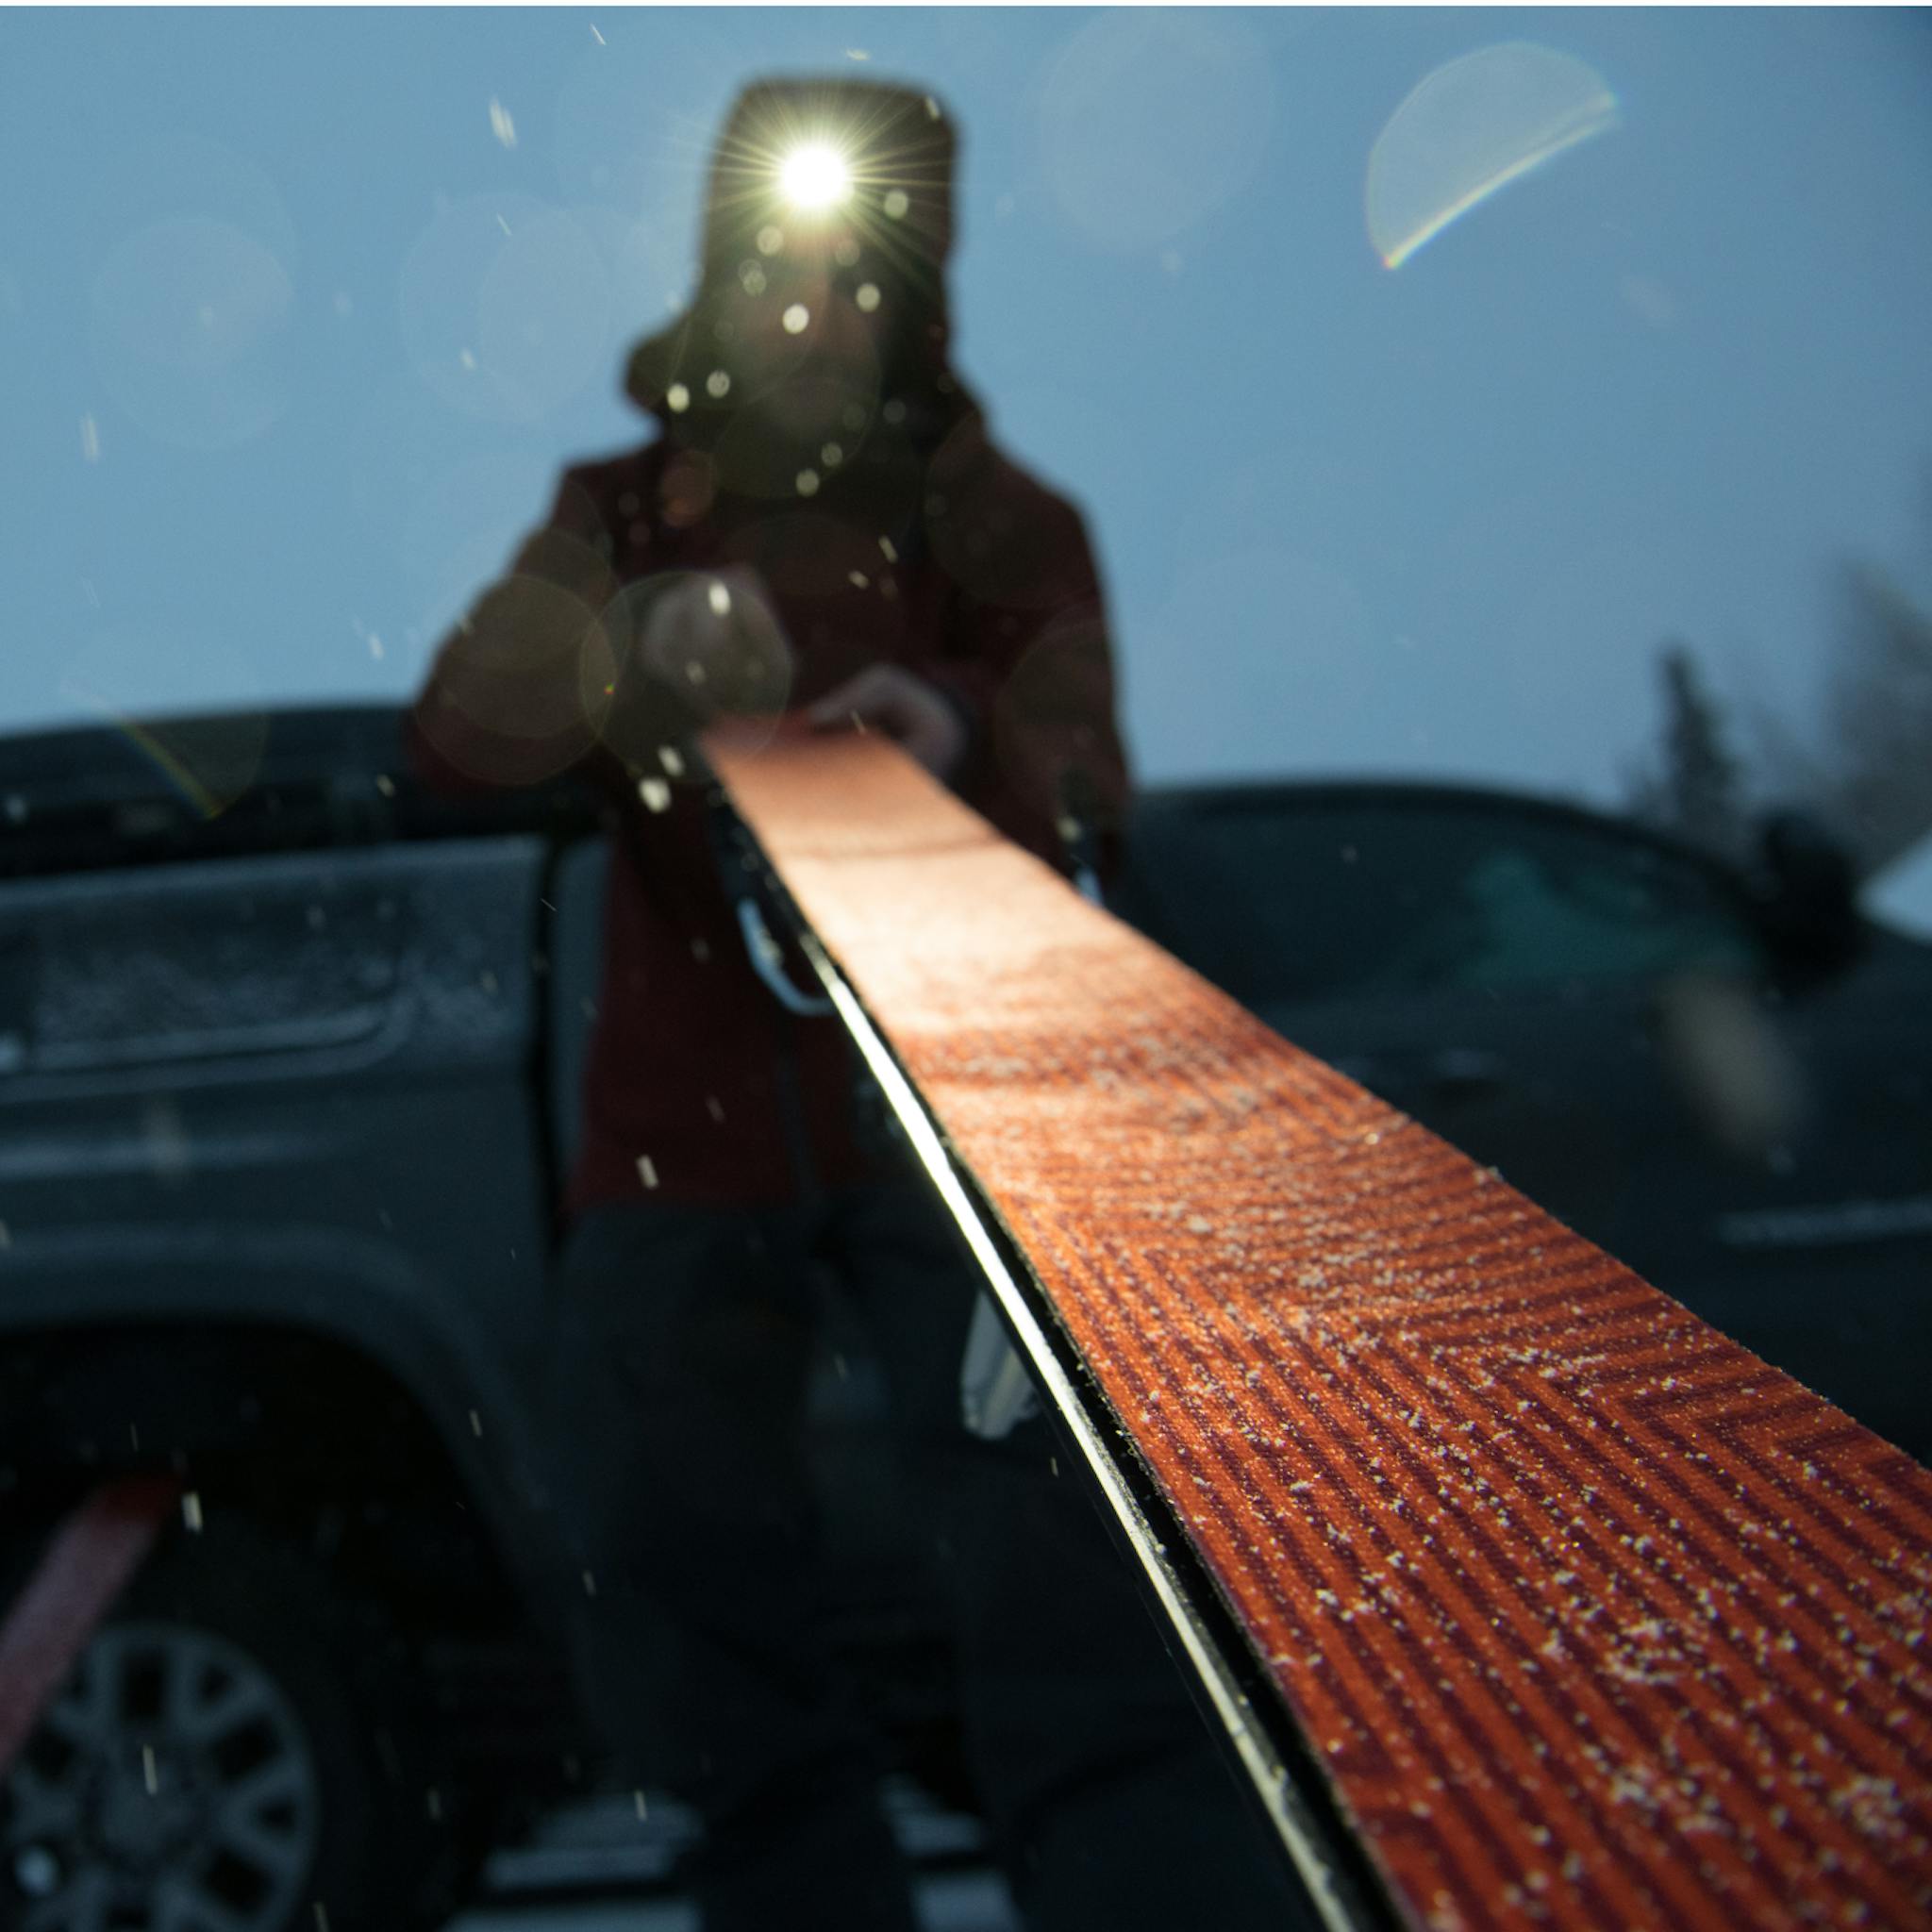 A skier with a BD headlamp puts skins on his skis.